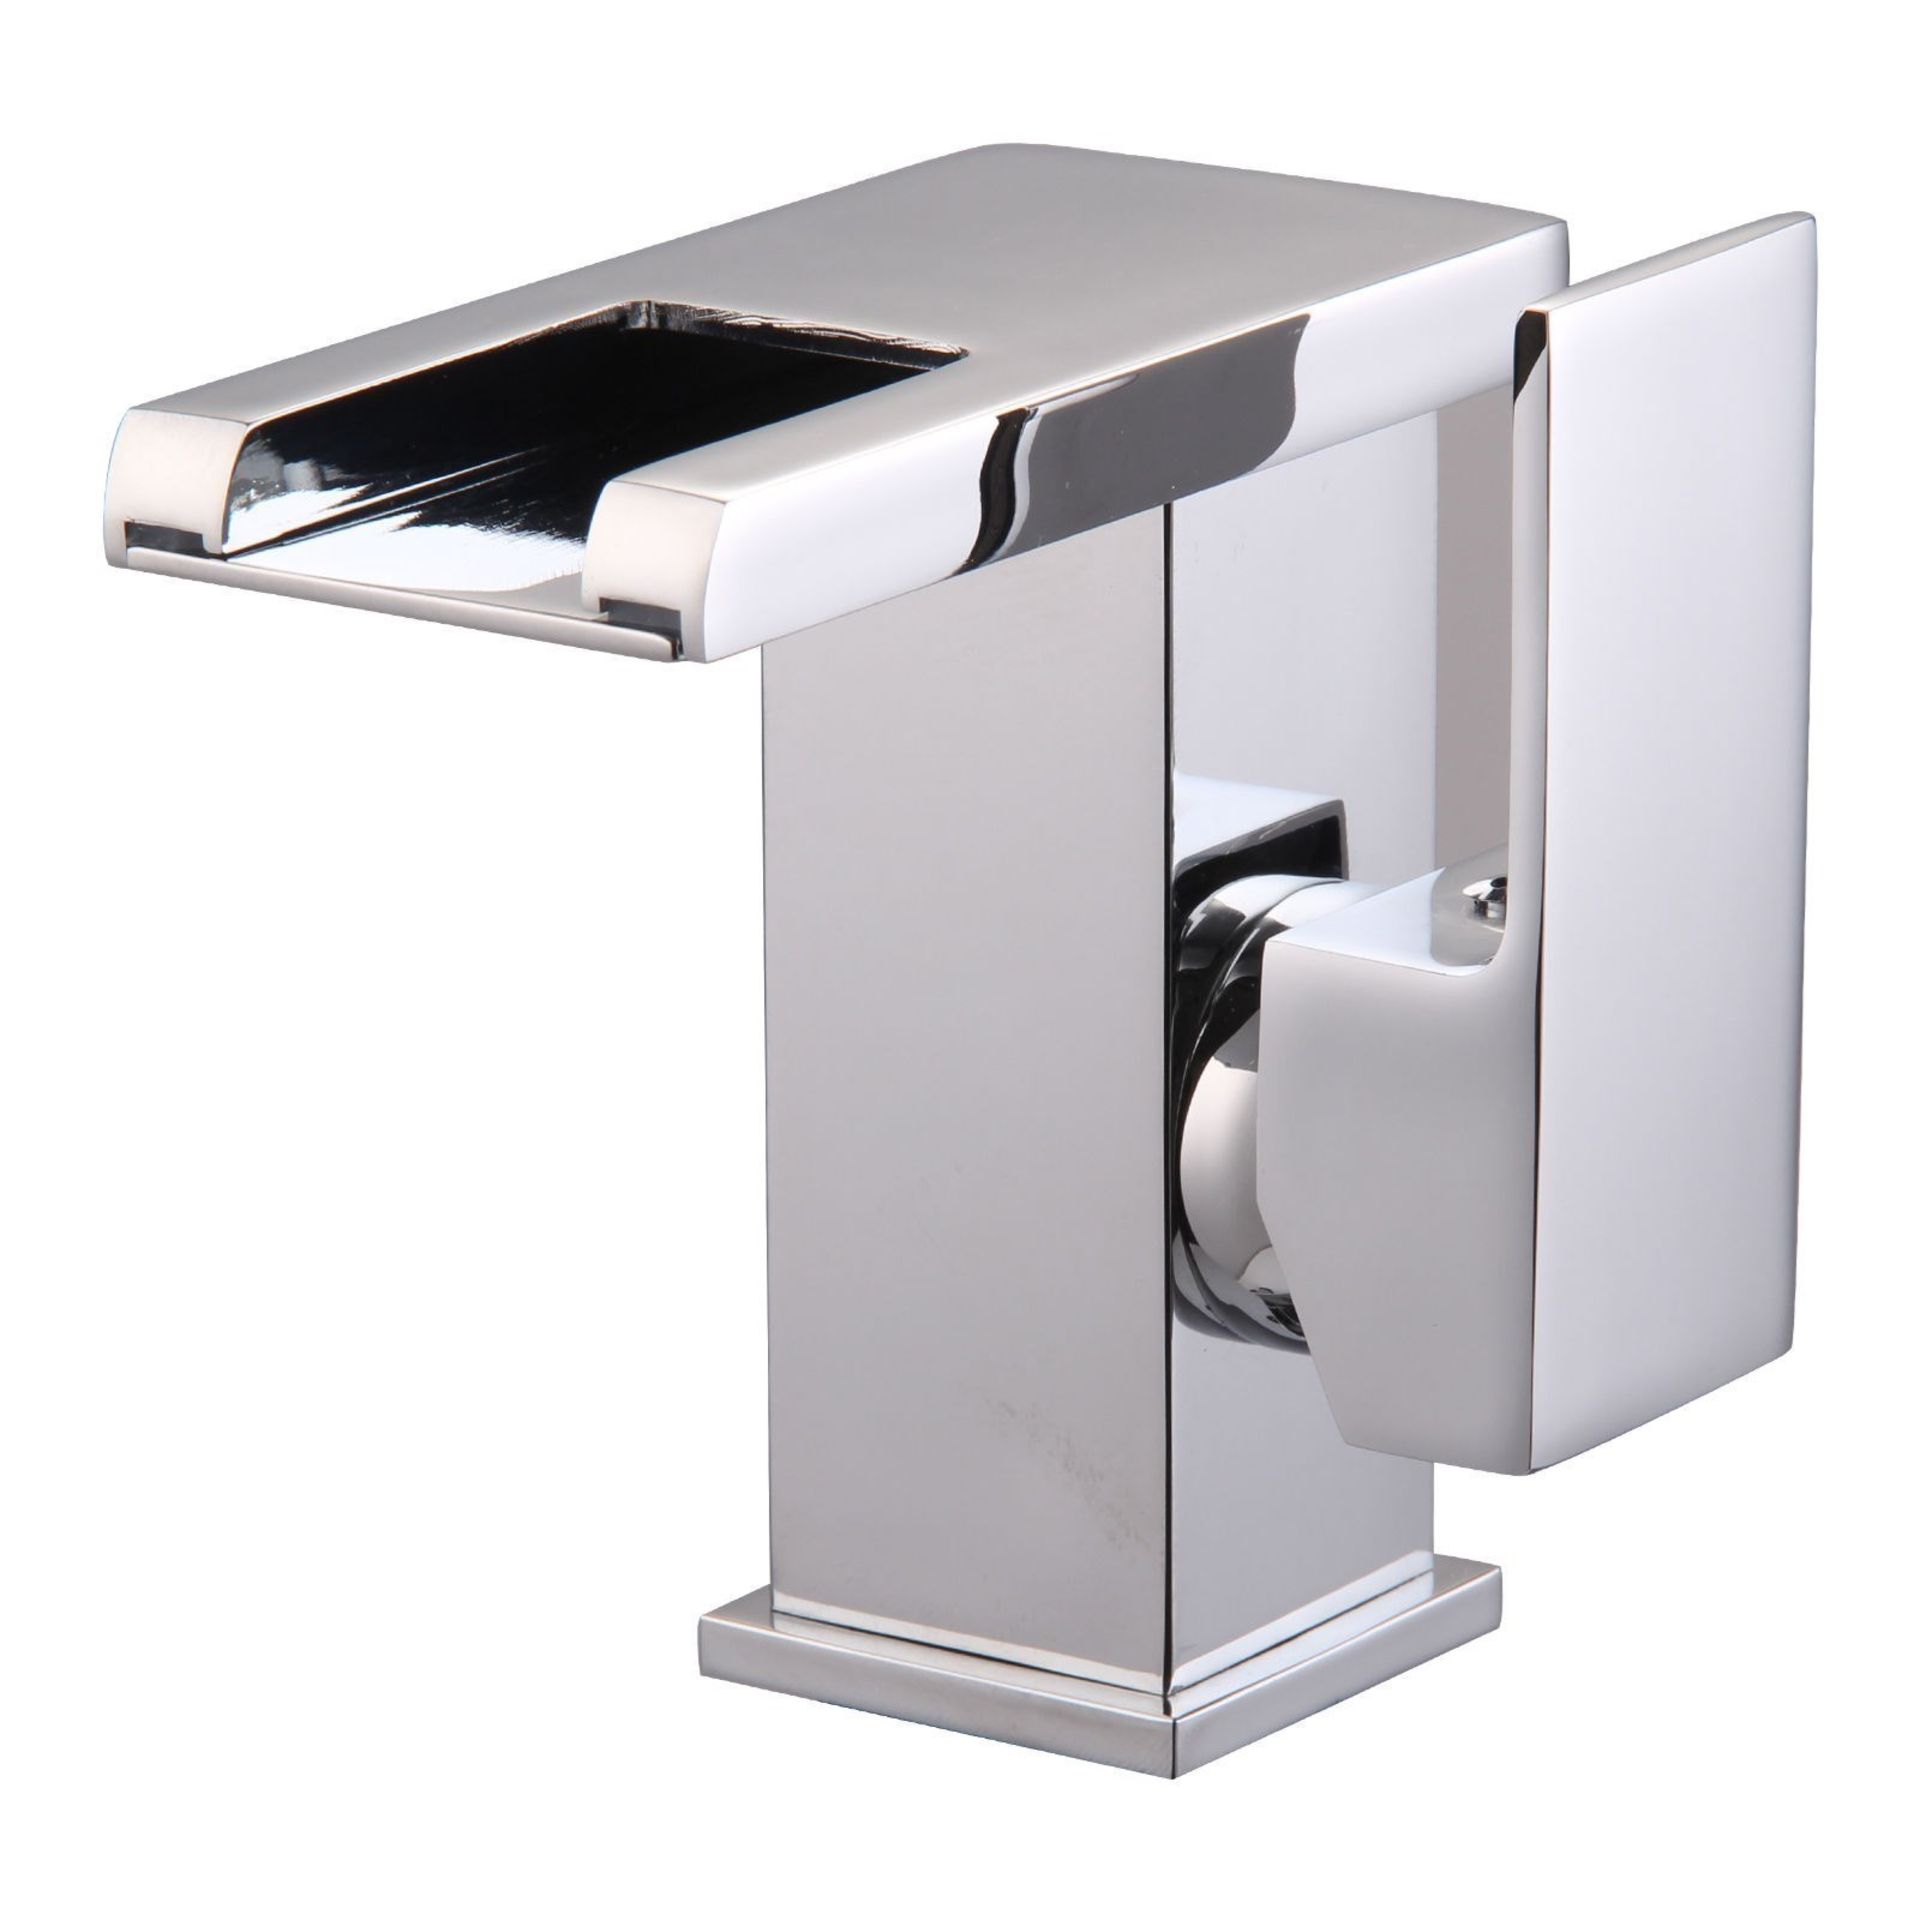 LED Waterfall Bathroom Basin Mixer Tap. RRP £229.99.Easy to install and clean. All copper m... - Image 3 of 3